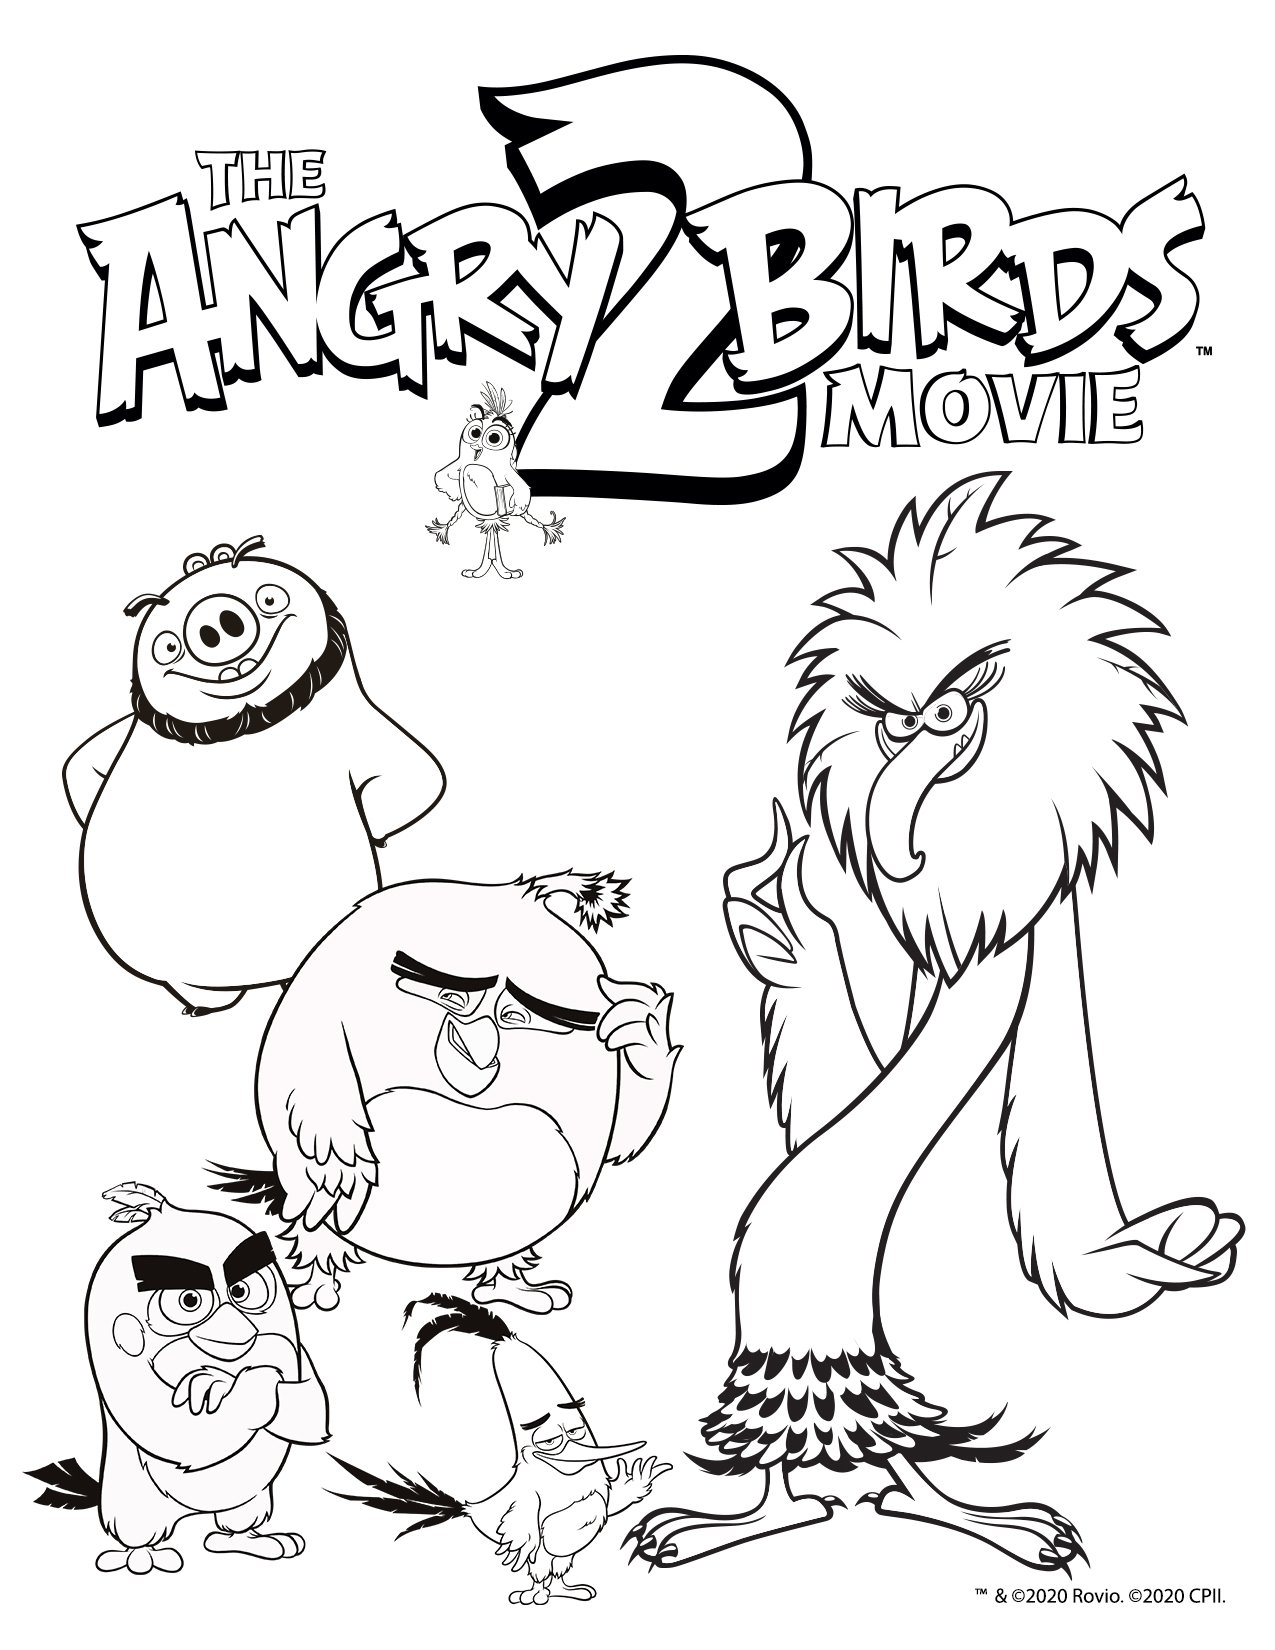 For Kids: Movie Coloring Sheets | Cinemark Movie News